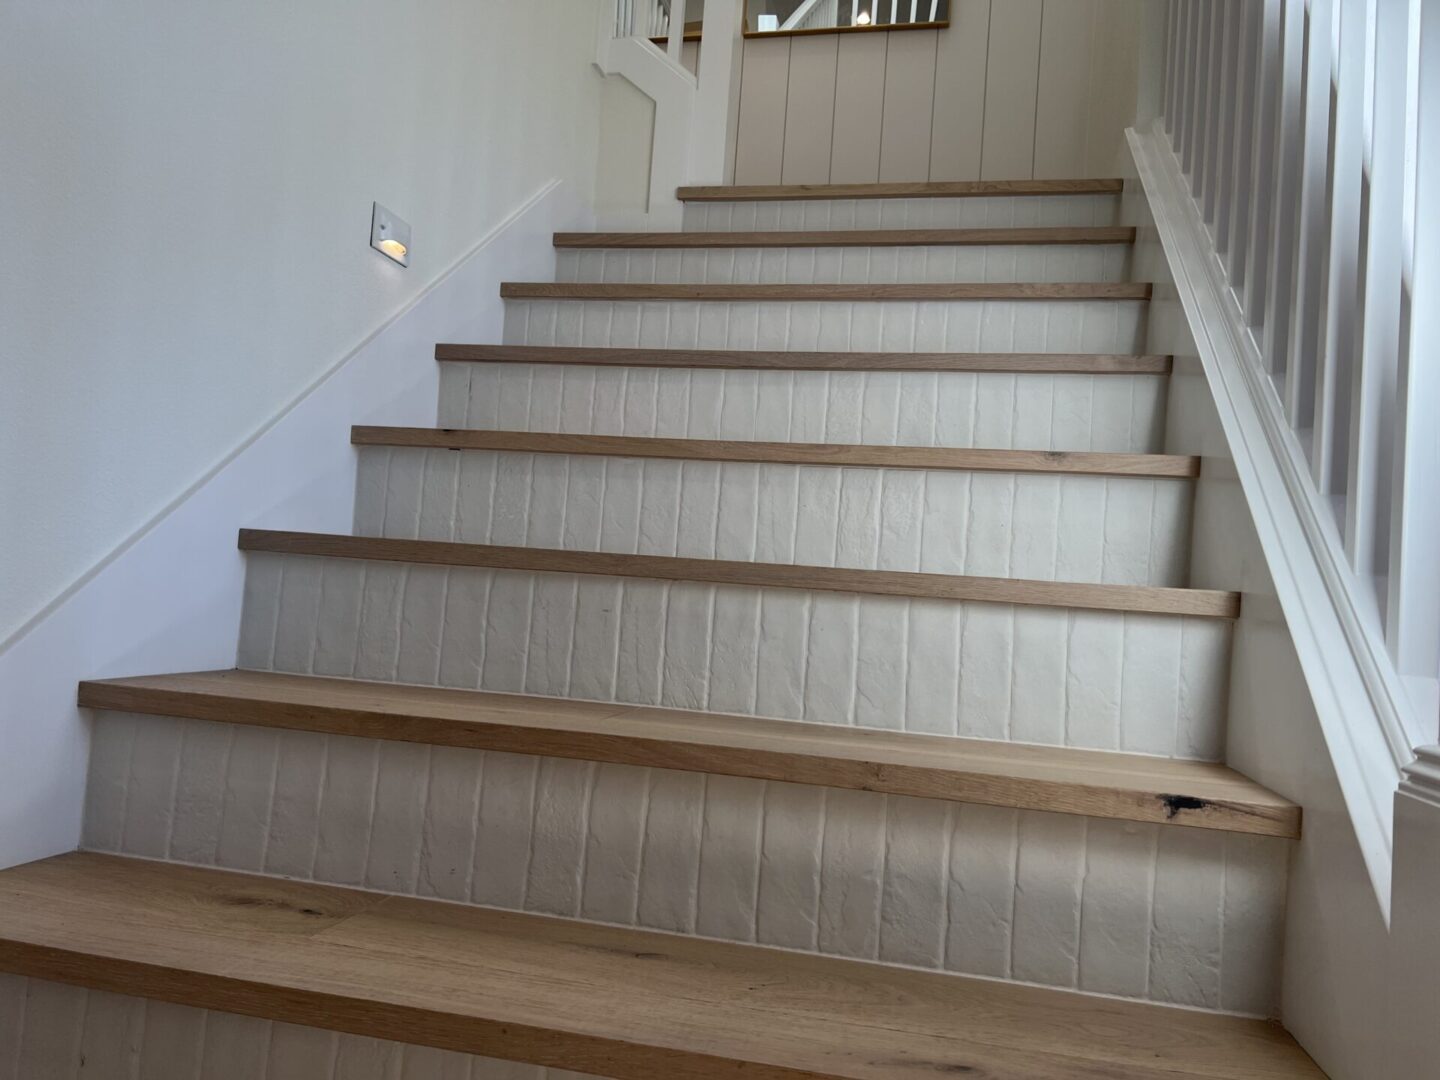 A staircase with wooden steps and white tiled risers.